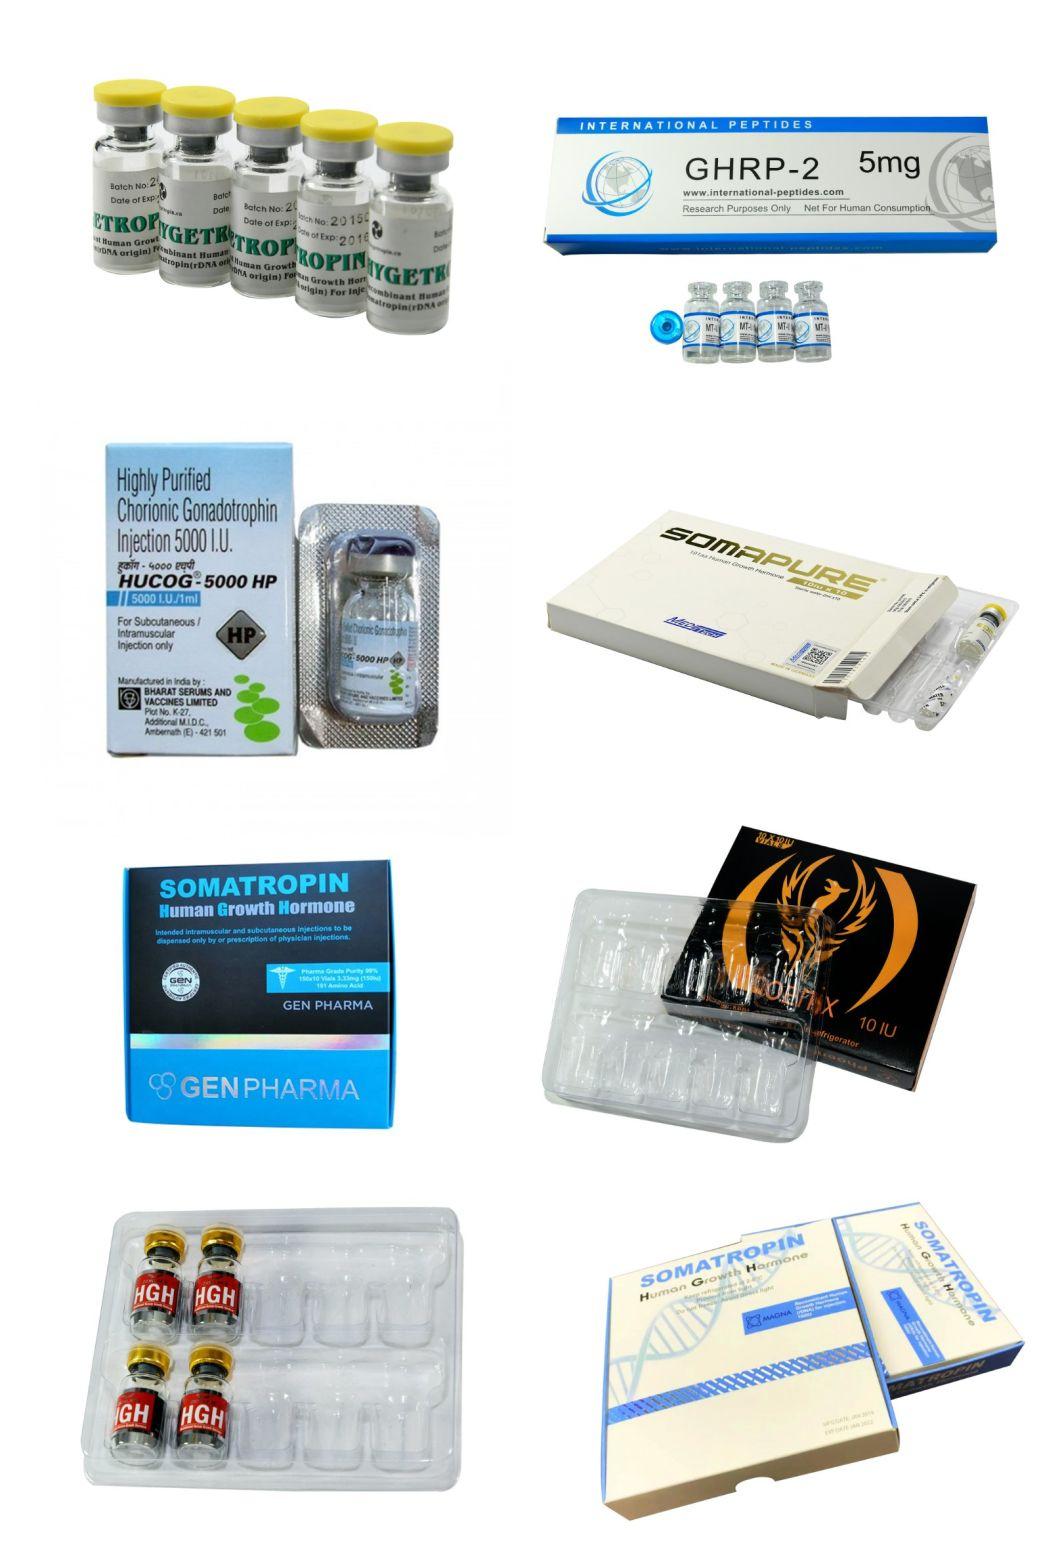 Shiny Glossy Surface Black Paper Card Box Empty 10iu X 10vials Peptides Vial HGH Blister Tray and Box